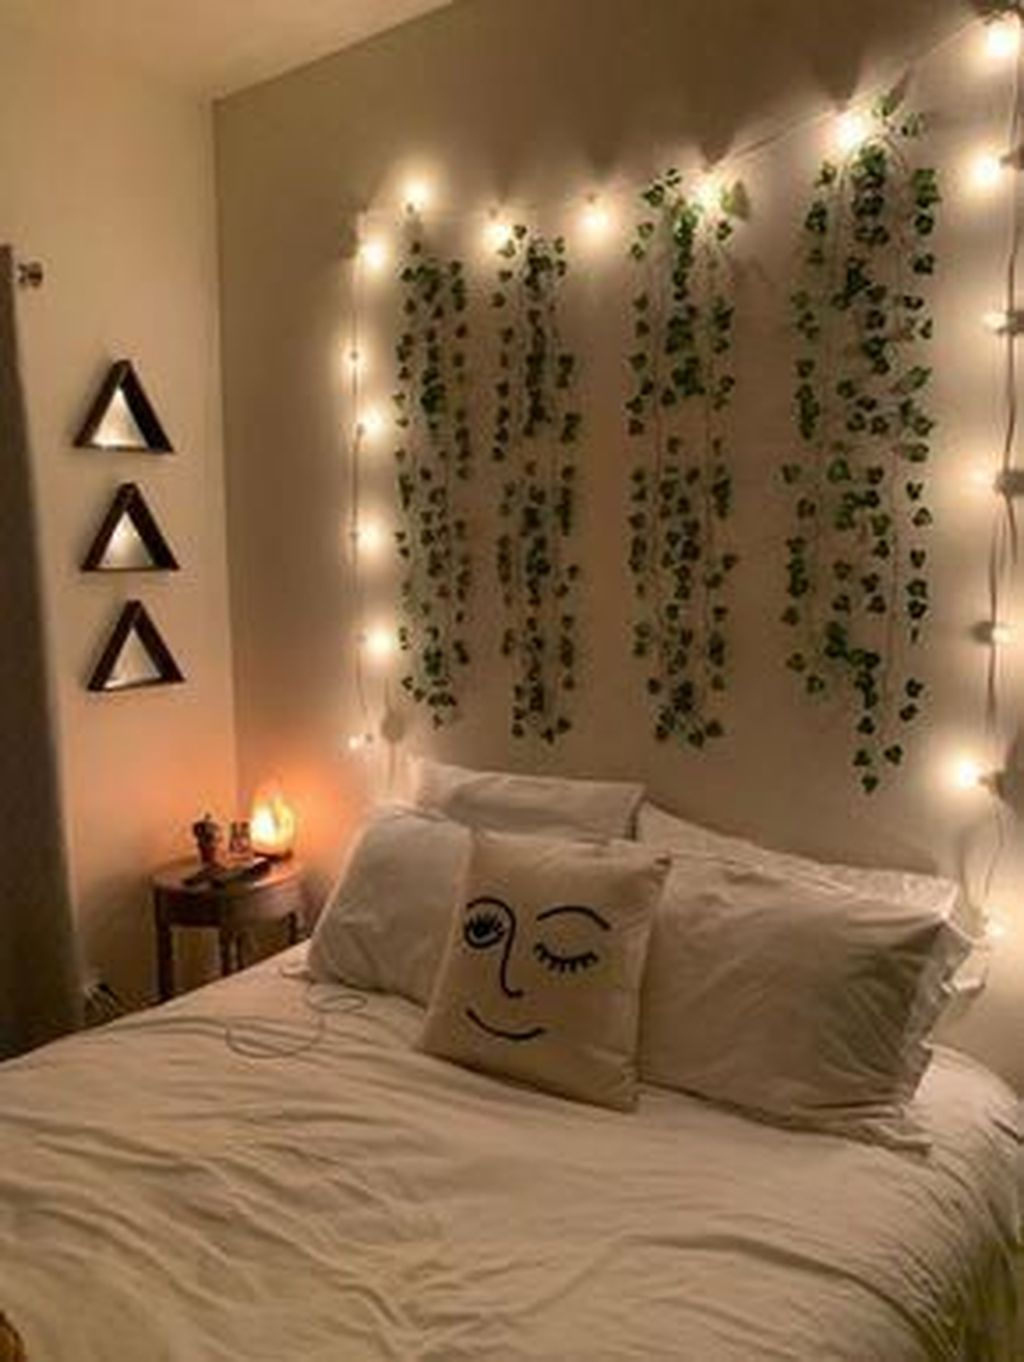 Admiring Bedroom Decor Ideas To Have Right Now 19